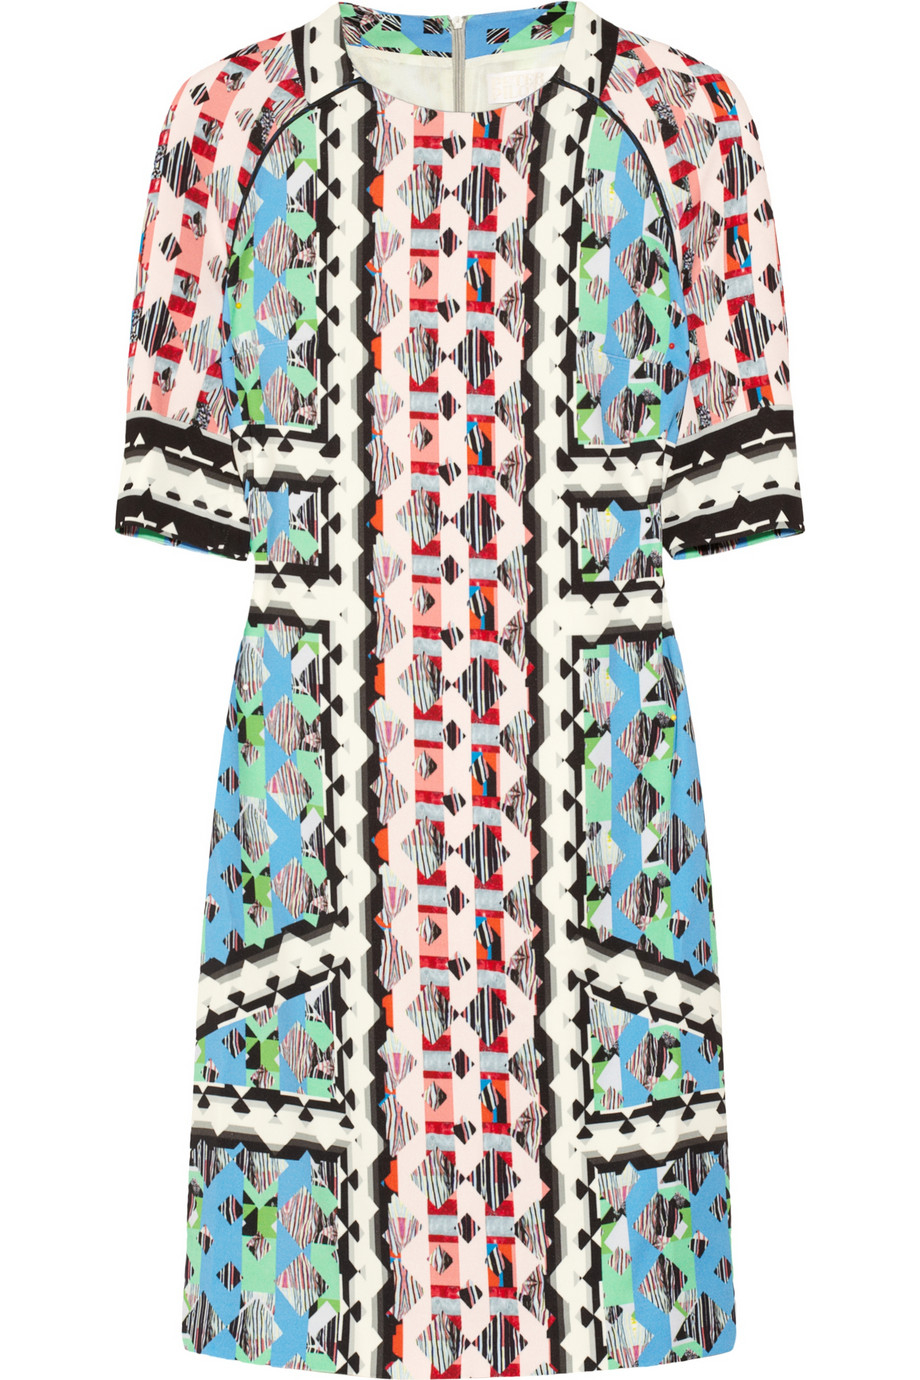 Peter pilotto Printed Stretchcrepe Dress | Lyst